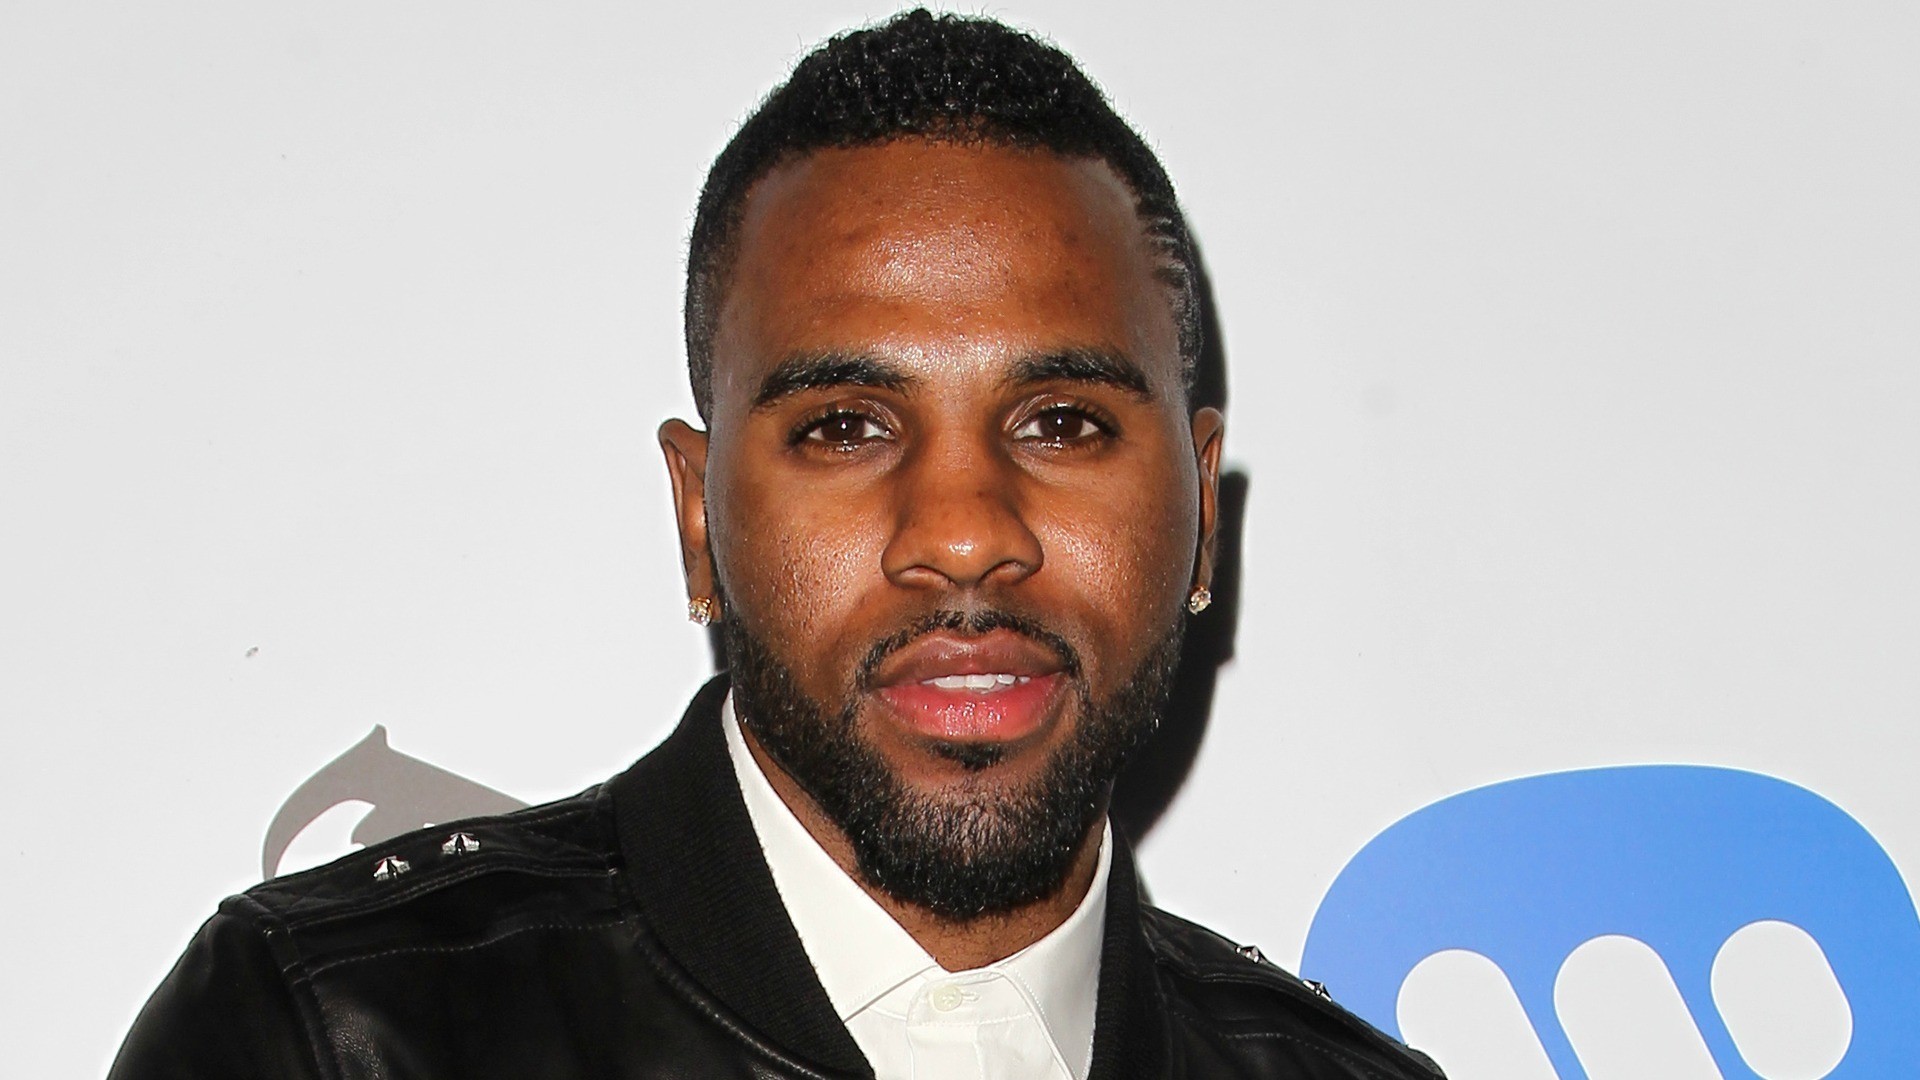 1920x1080 Jason Derulo thinks Tinder is the future, so he's using it in a totally new